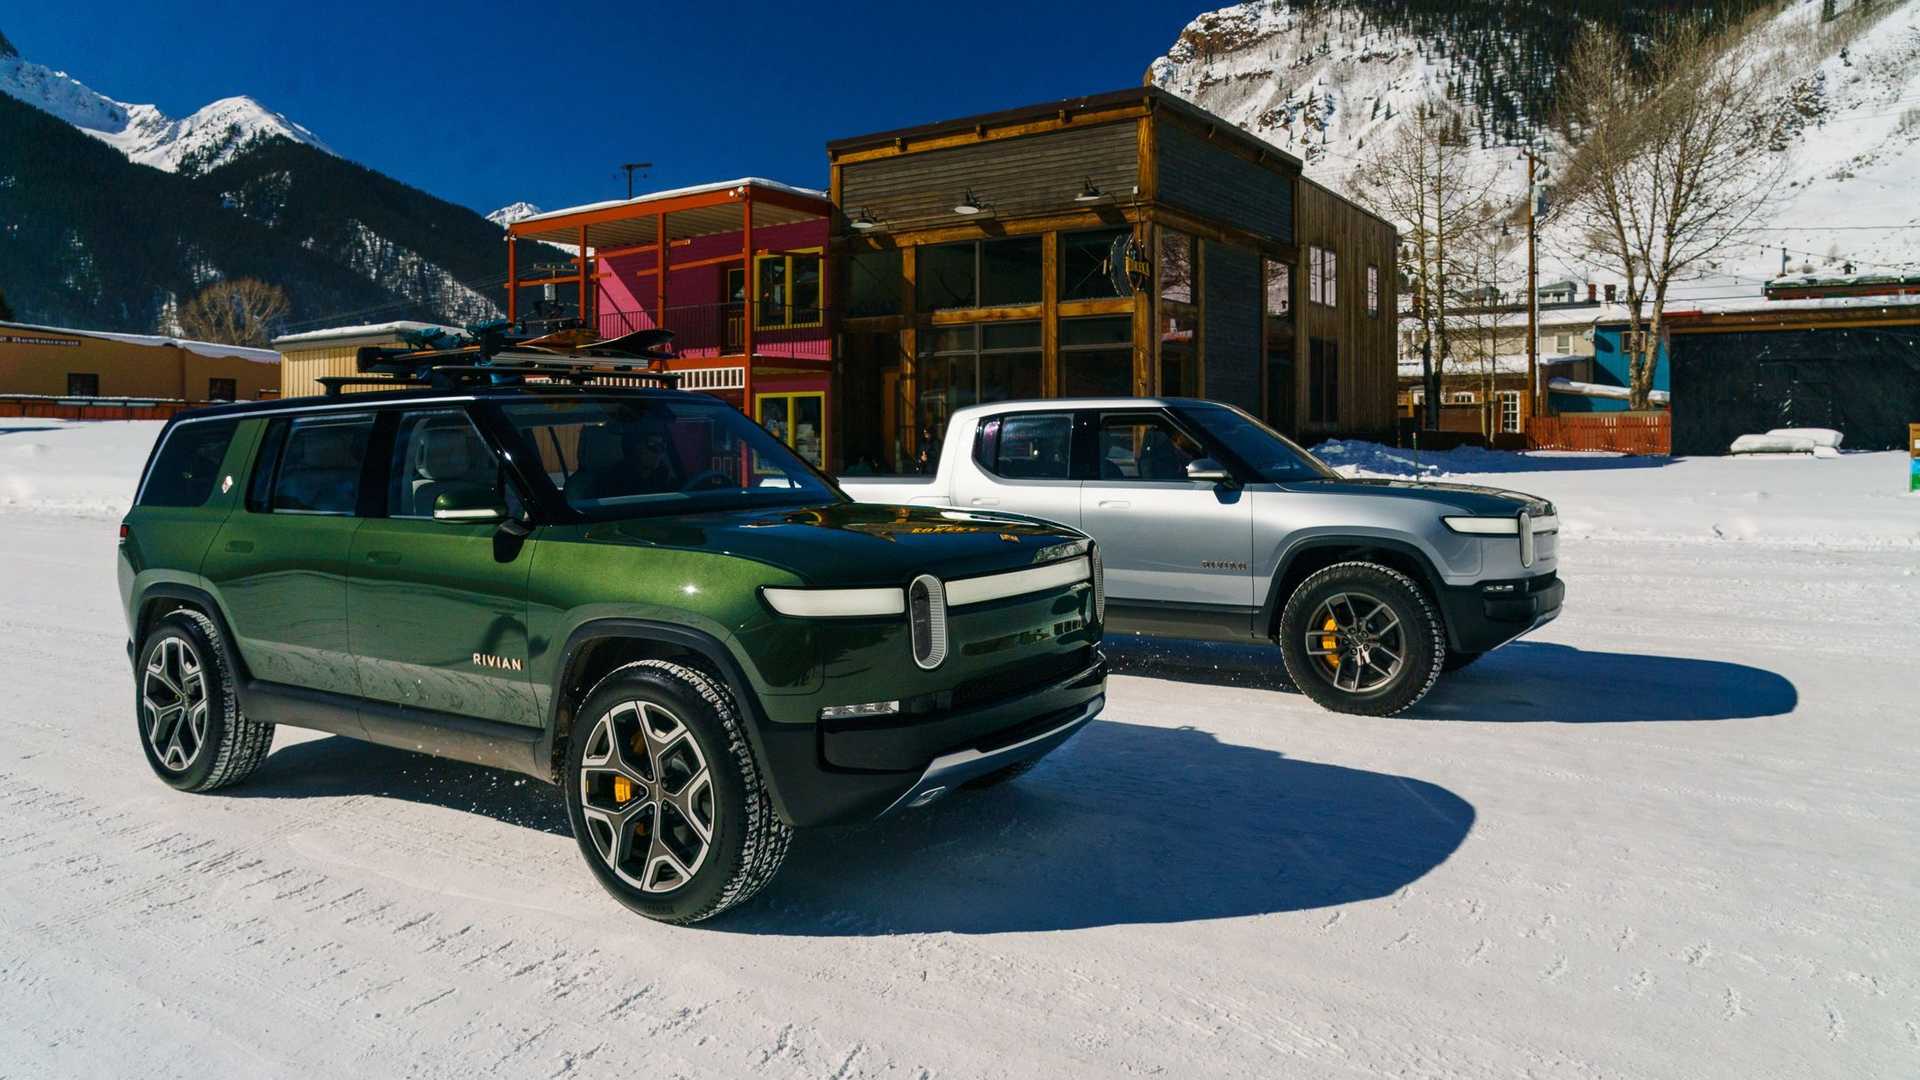 Rivian EV - Rivian delay deliveries of its electric pickup truck and SUV with big battery packs to 2023